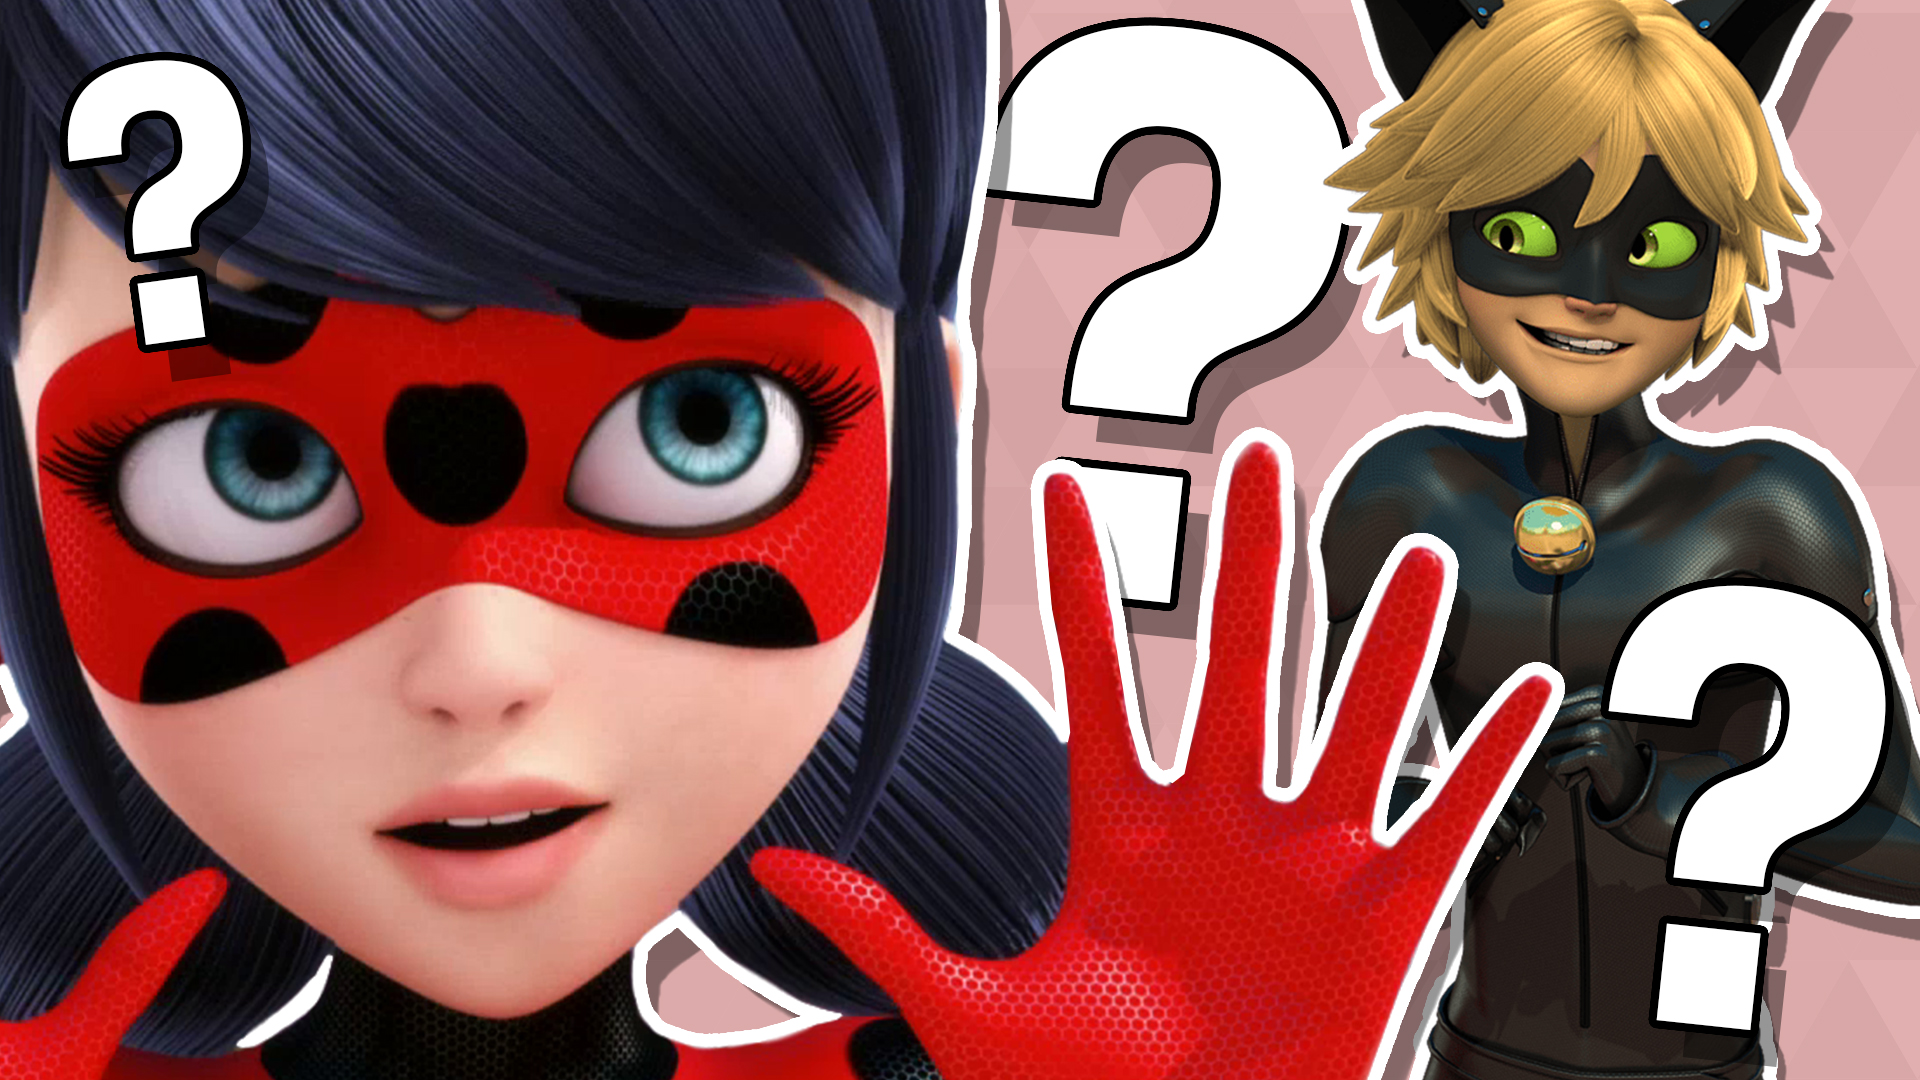 QUIZ: Which Miraculous Character Are You Most Like? - Quizondo